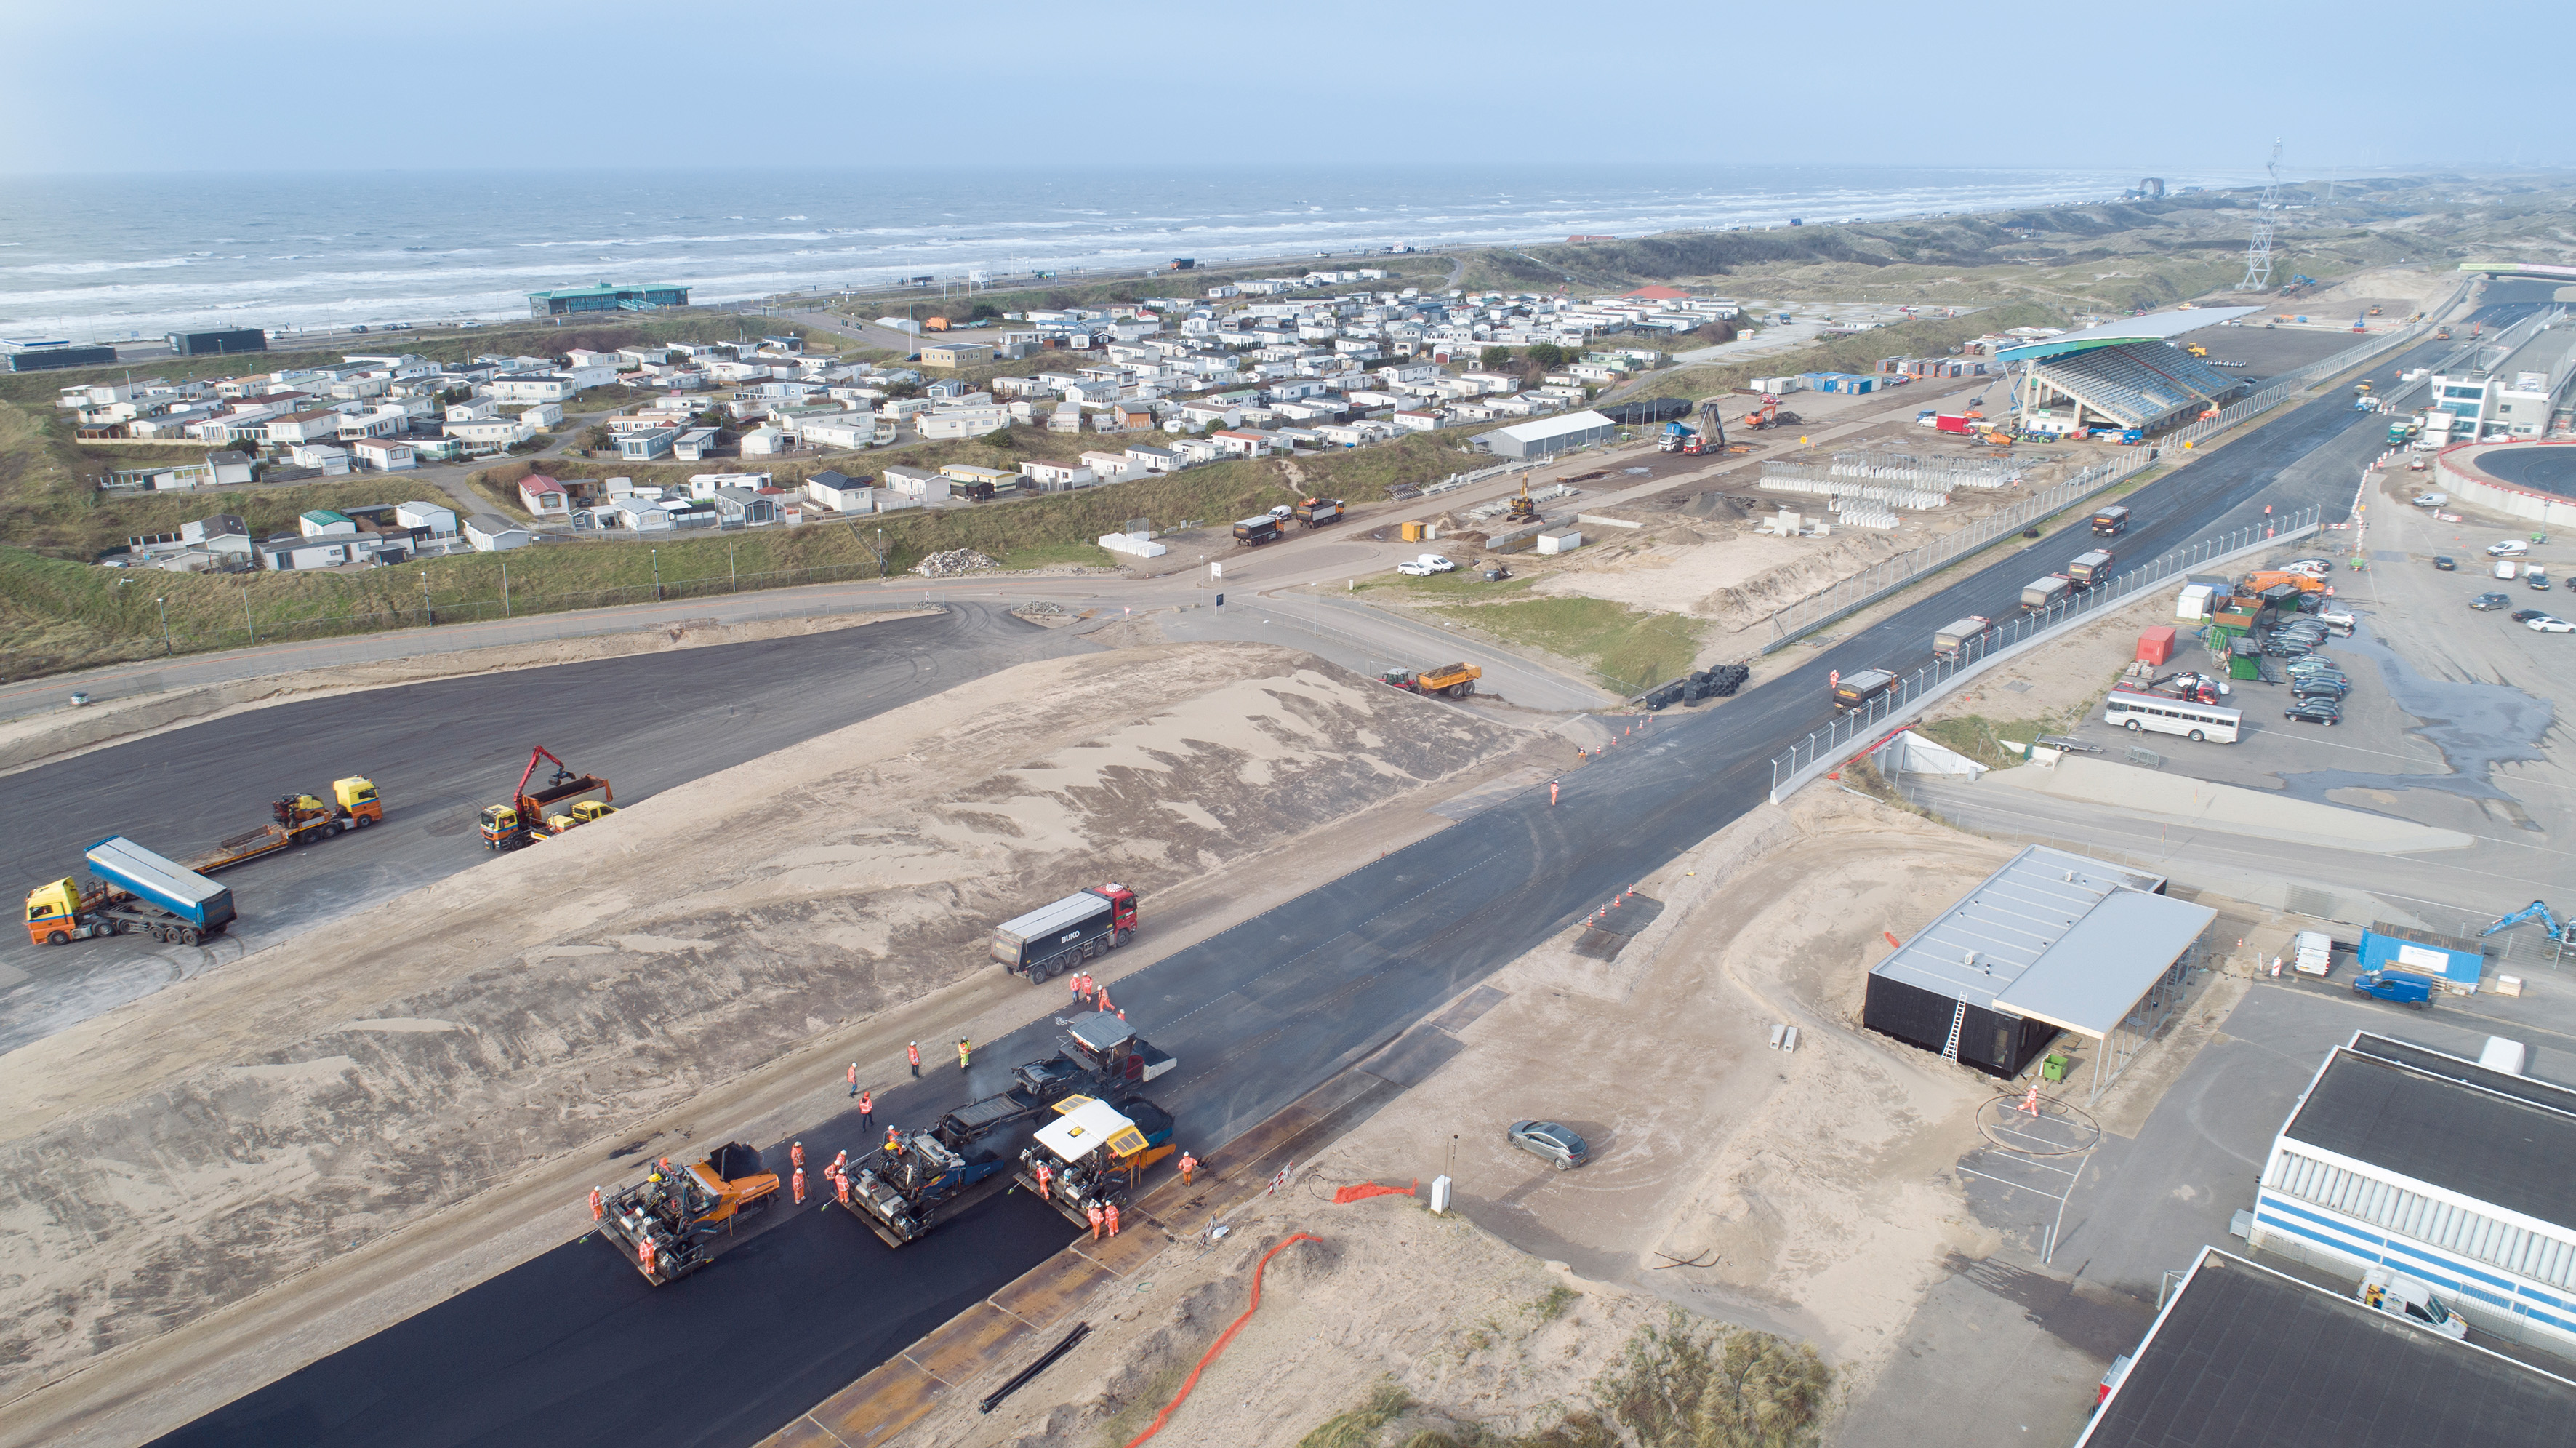 Legendary race track on the North Sea coast: Ahead of the Dutch Grand Prix, Circuit Zandvoort has been modernised and had two steeply banked turns added. <br> Bildquelle: Kiesel GmbH